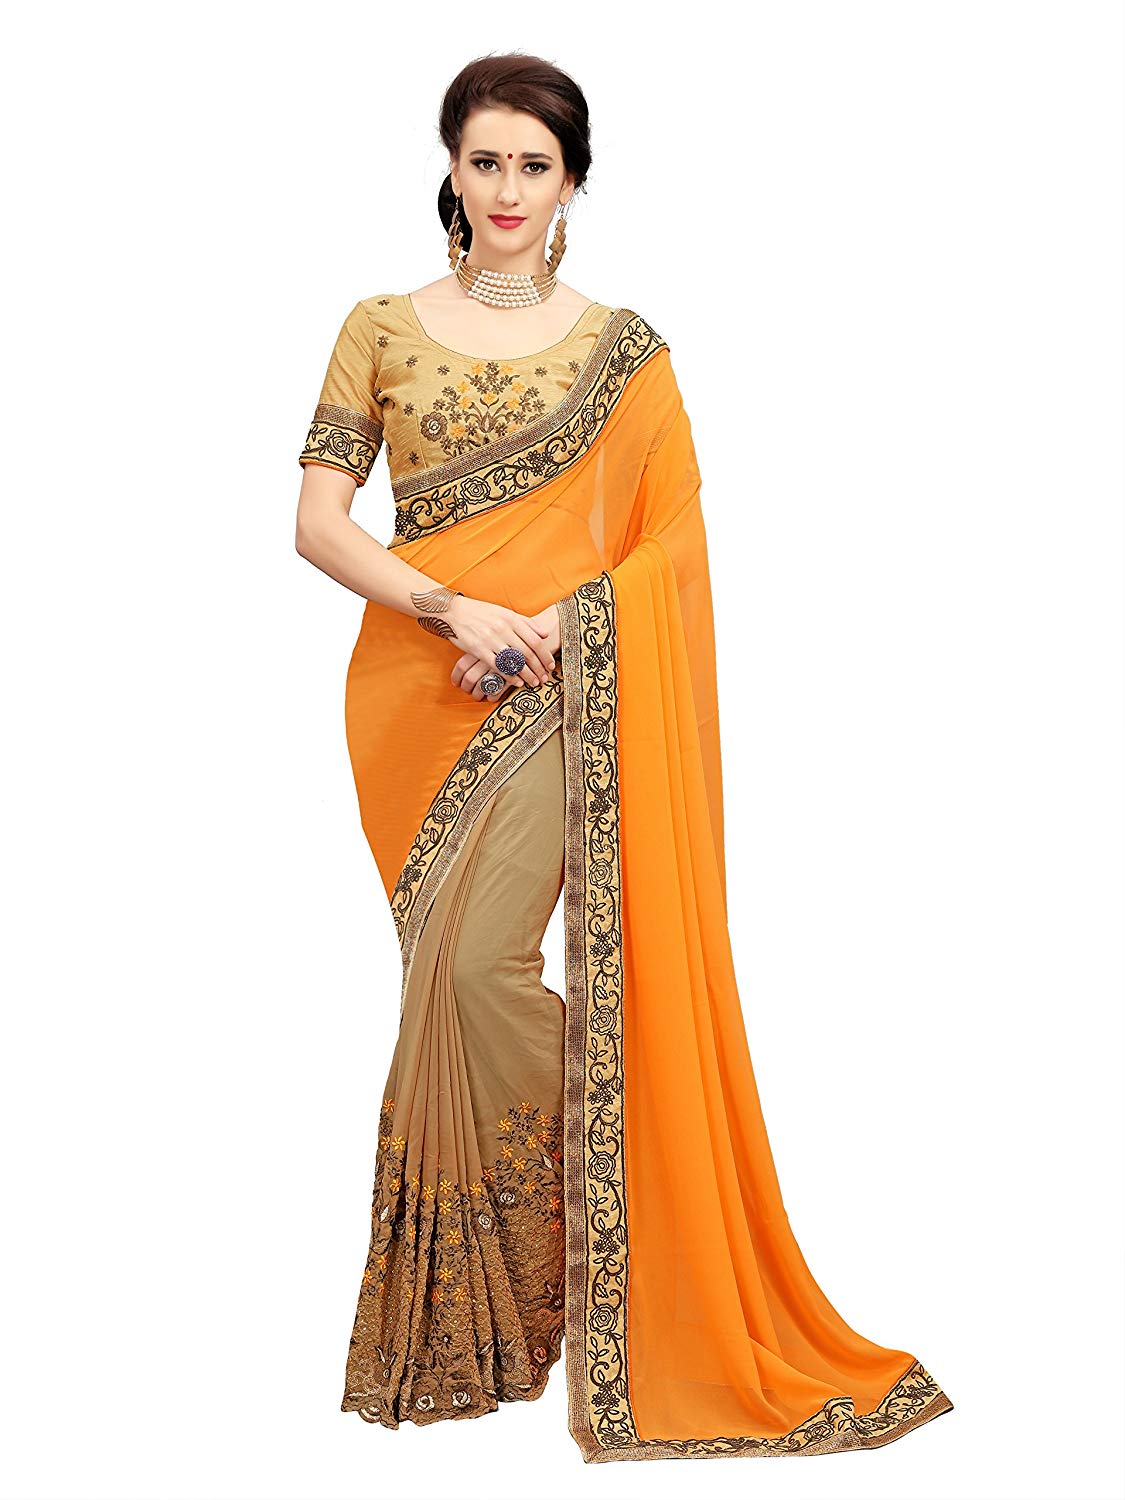 Glory Sarees Georgette With Blouse Piece (diva102orange_Orange and Brown_Free Size) Price in India